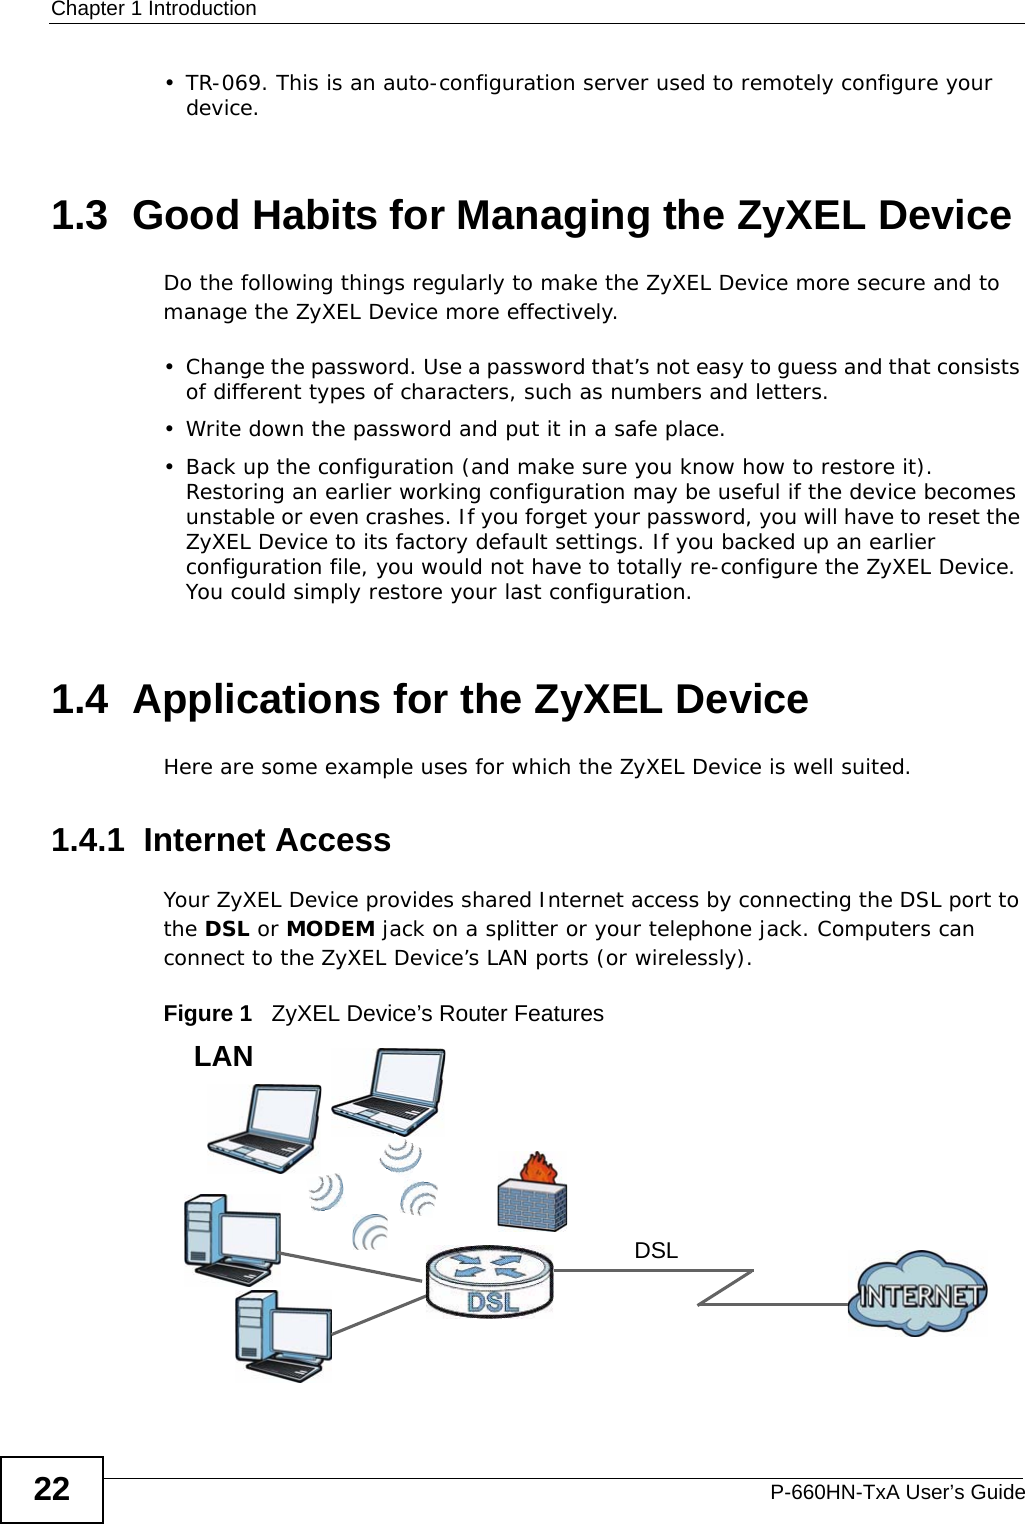 Chapter 1 IntroductionP-660HN-TxA User’s Guide22• TR-069. This is an auto-configuration server used to remotely configure your device.1.3  Good Habits for Managing the ZyXEL DeviceDo the following things regularly to make the ZyXEL Device more secure and to manage the ZyXEL Device more effectively.• Change the password. Use a password that’s not easy to guess and that consists of different types of characters, such as numbers and letters.• Write down the password and put it in a safe place.• Back up the configuration (and make sure you know how to restore it). Restoring an earlier working configuration may be useful if the device becomes unstable or even crashes. If you forget your password, you will have to reset the ZyXEL Device to its factory default settings. If you backed up an earlier configuration file, you would not have to totally re-configure the ZyXEL Device. You could simply restore your last configuration.1.4  Applications for the ZyXEL DeviceHere are some example uses for which the ZyXEL Device is well suited.1.4.1  Internet AccessYour ZyXEL Device provides shared Internet access by connecting the DSL port to the DSL or MODEM jack on a splitter or your telephone jack. Computers can connect to the ZyXEL Device’s LAN ports (or wirelessly).Figure 1   ZyXEL Device’s Router FeaturesDSLLAN